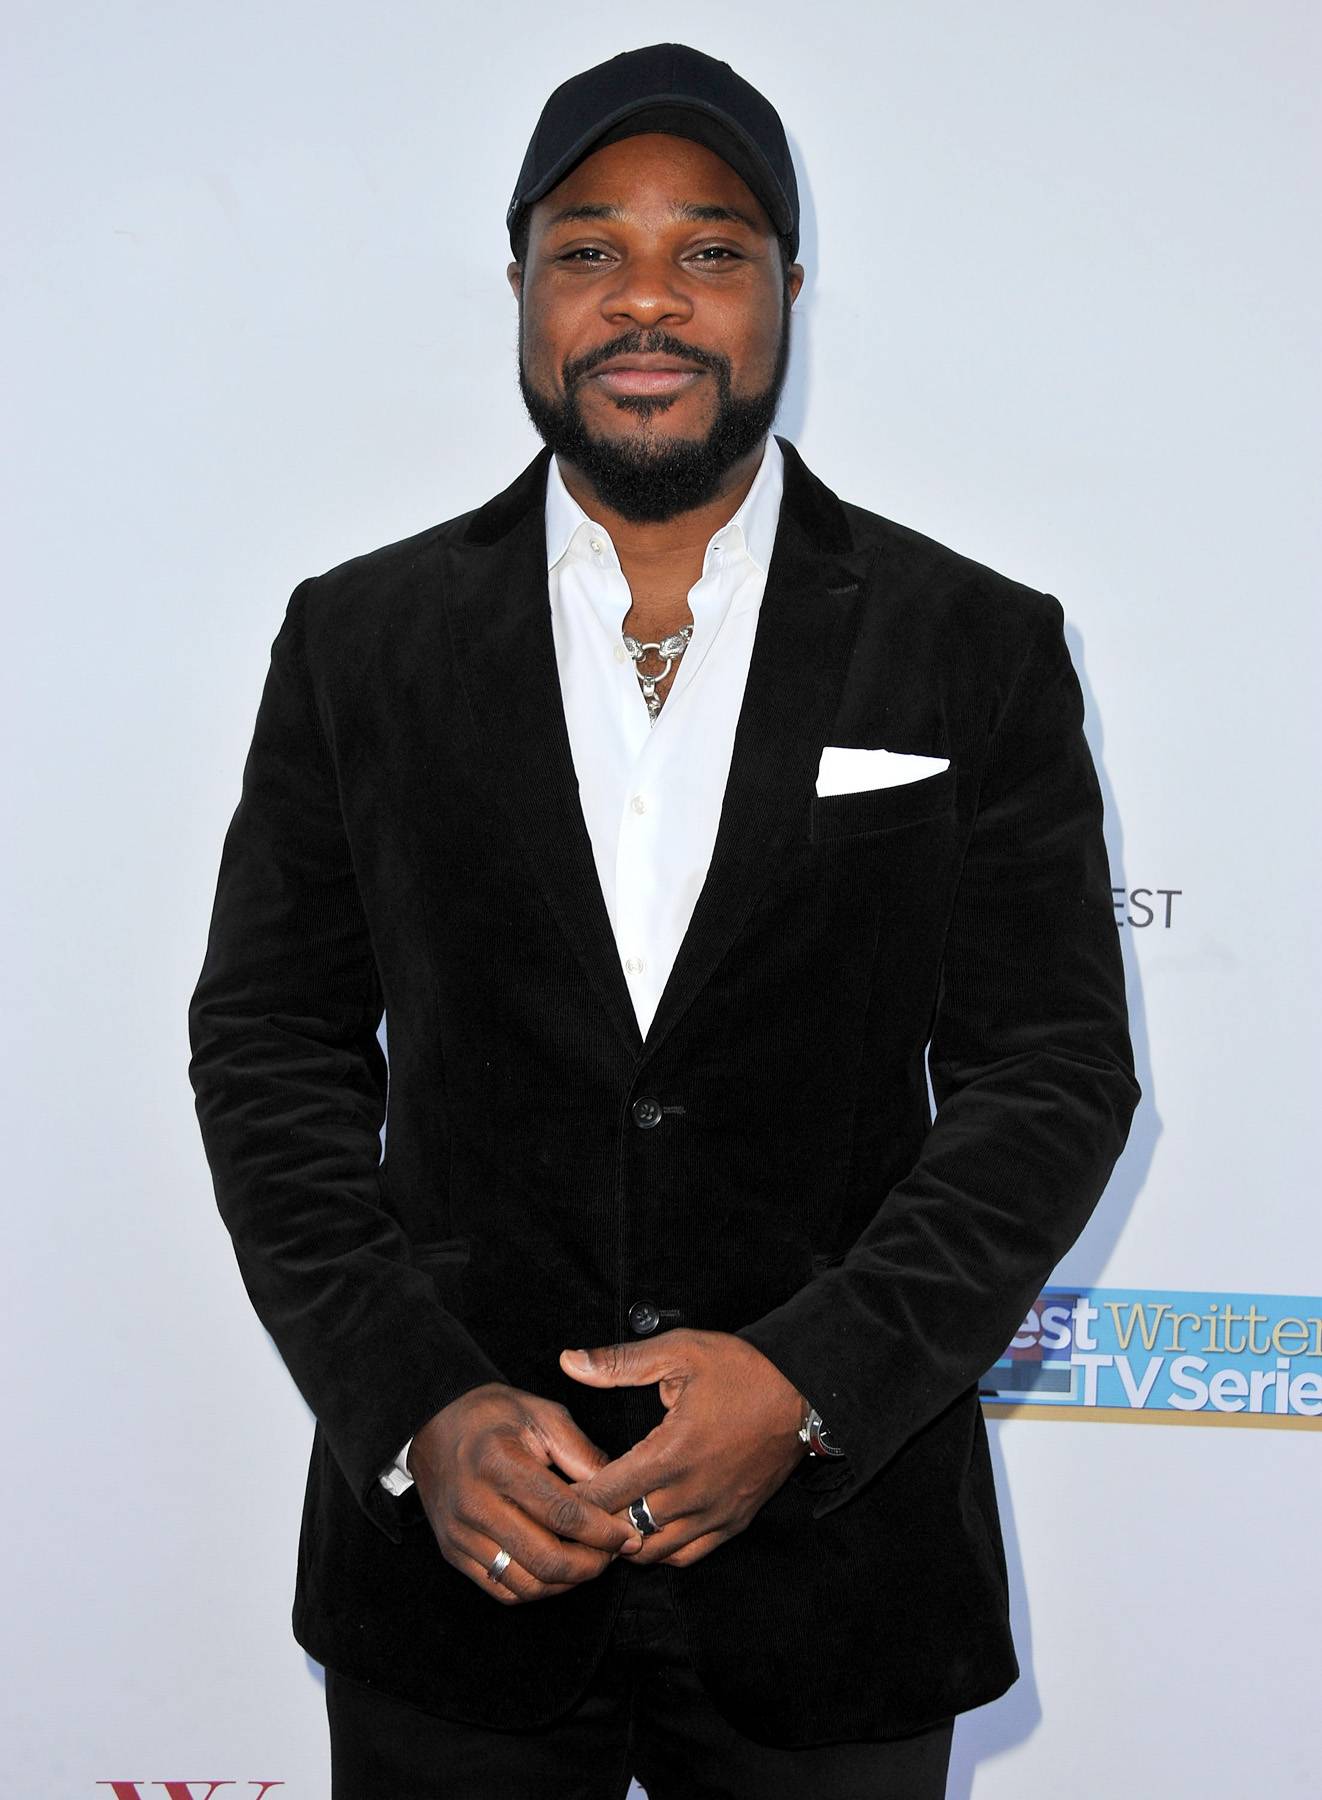 Malcolm-Jamal Warner, The Cosby Show